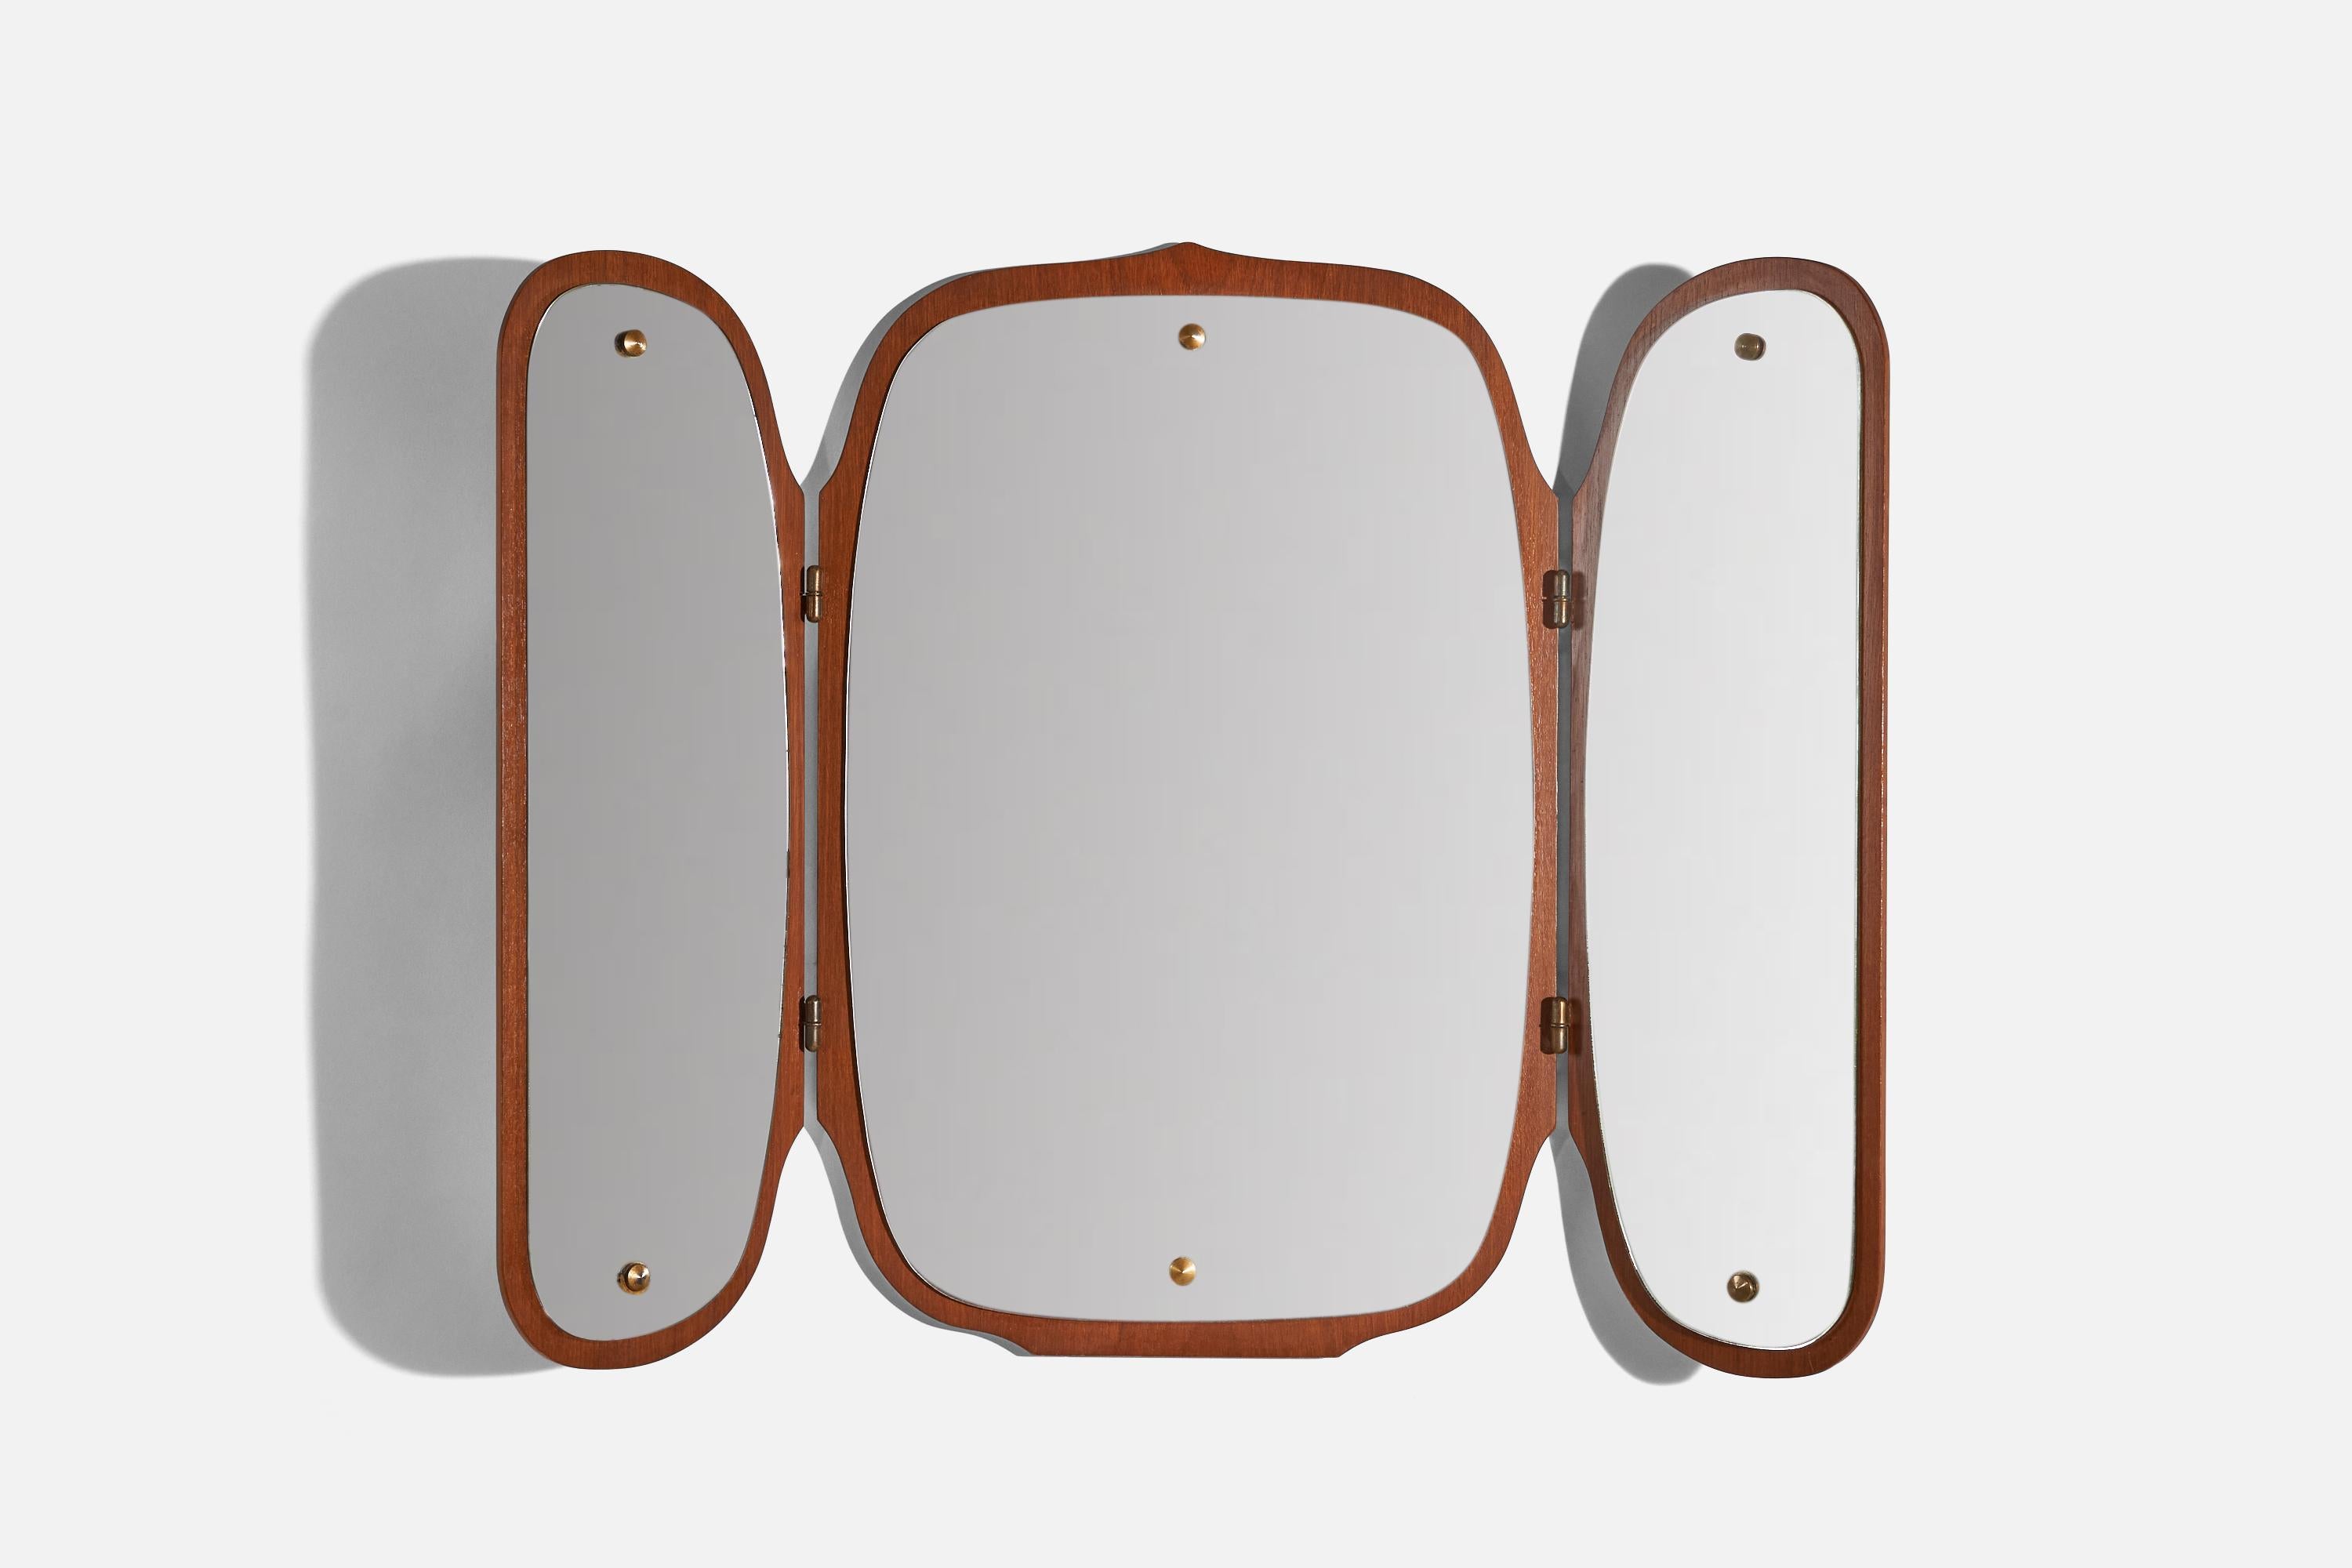 A three part wooden wall mirror designed and produced in Italy, c. 1950s.

The width measurement stated corresponds to the maximum extended position of the mirror.